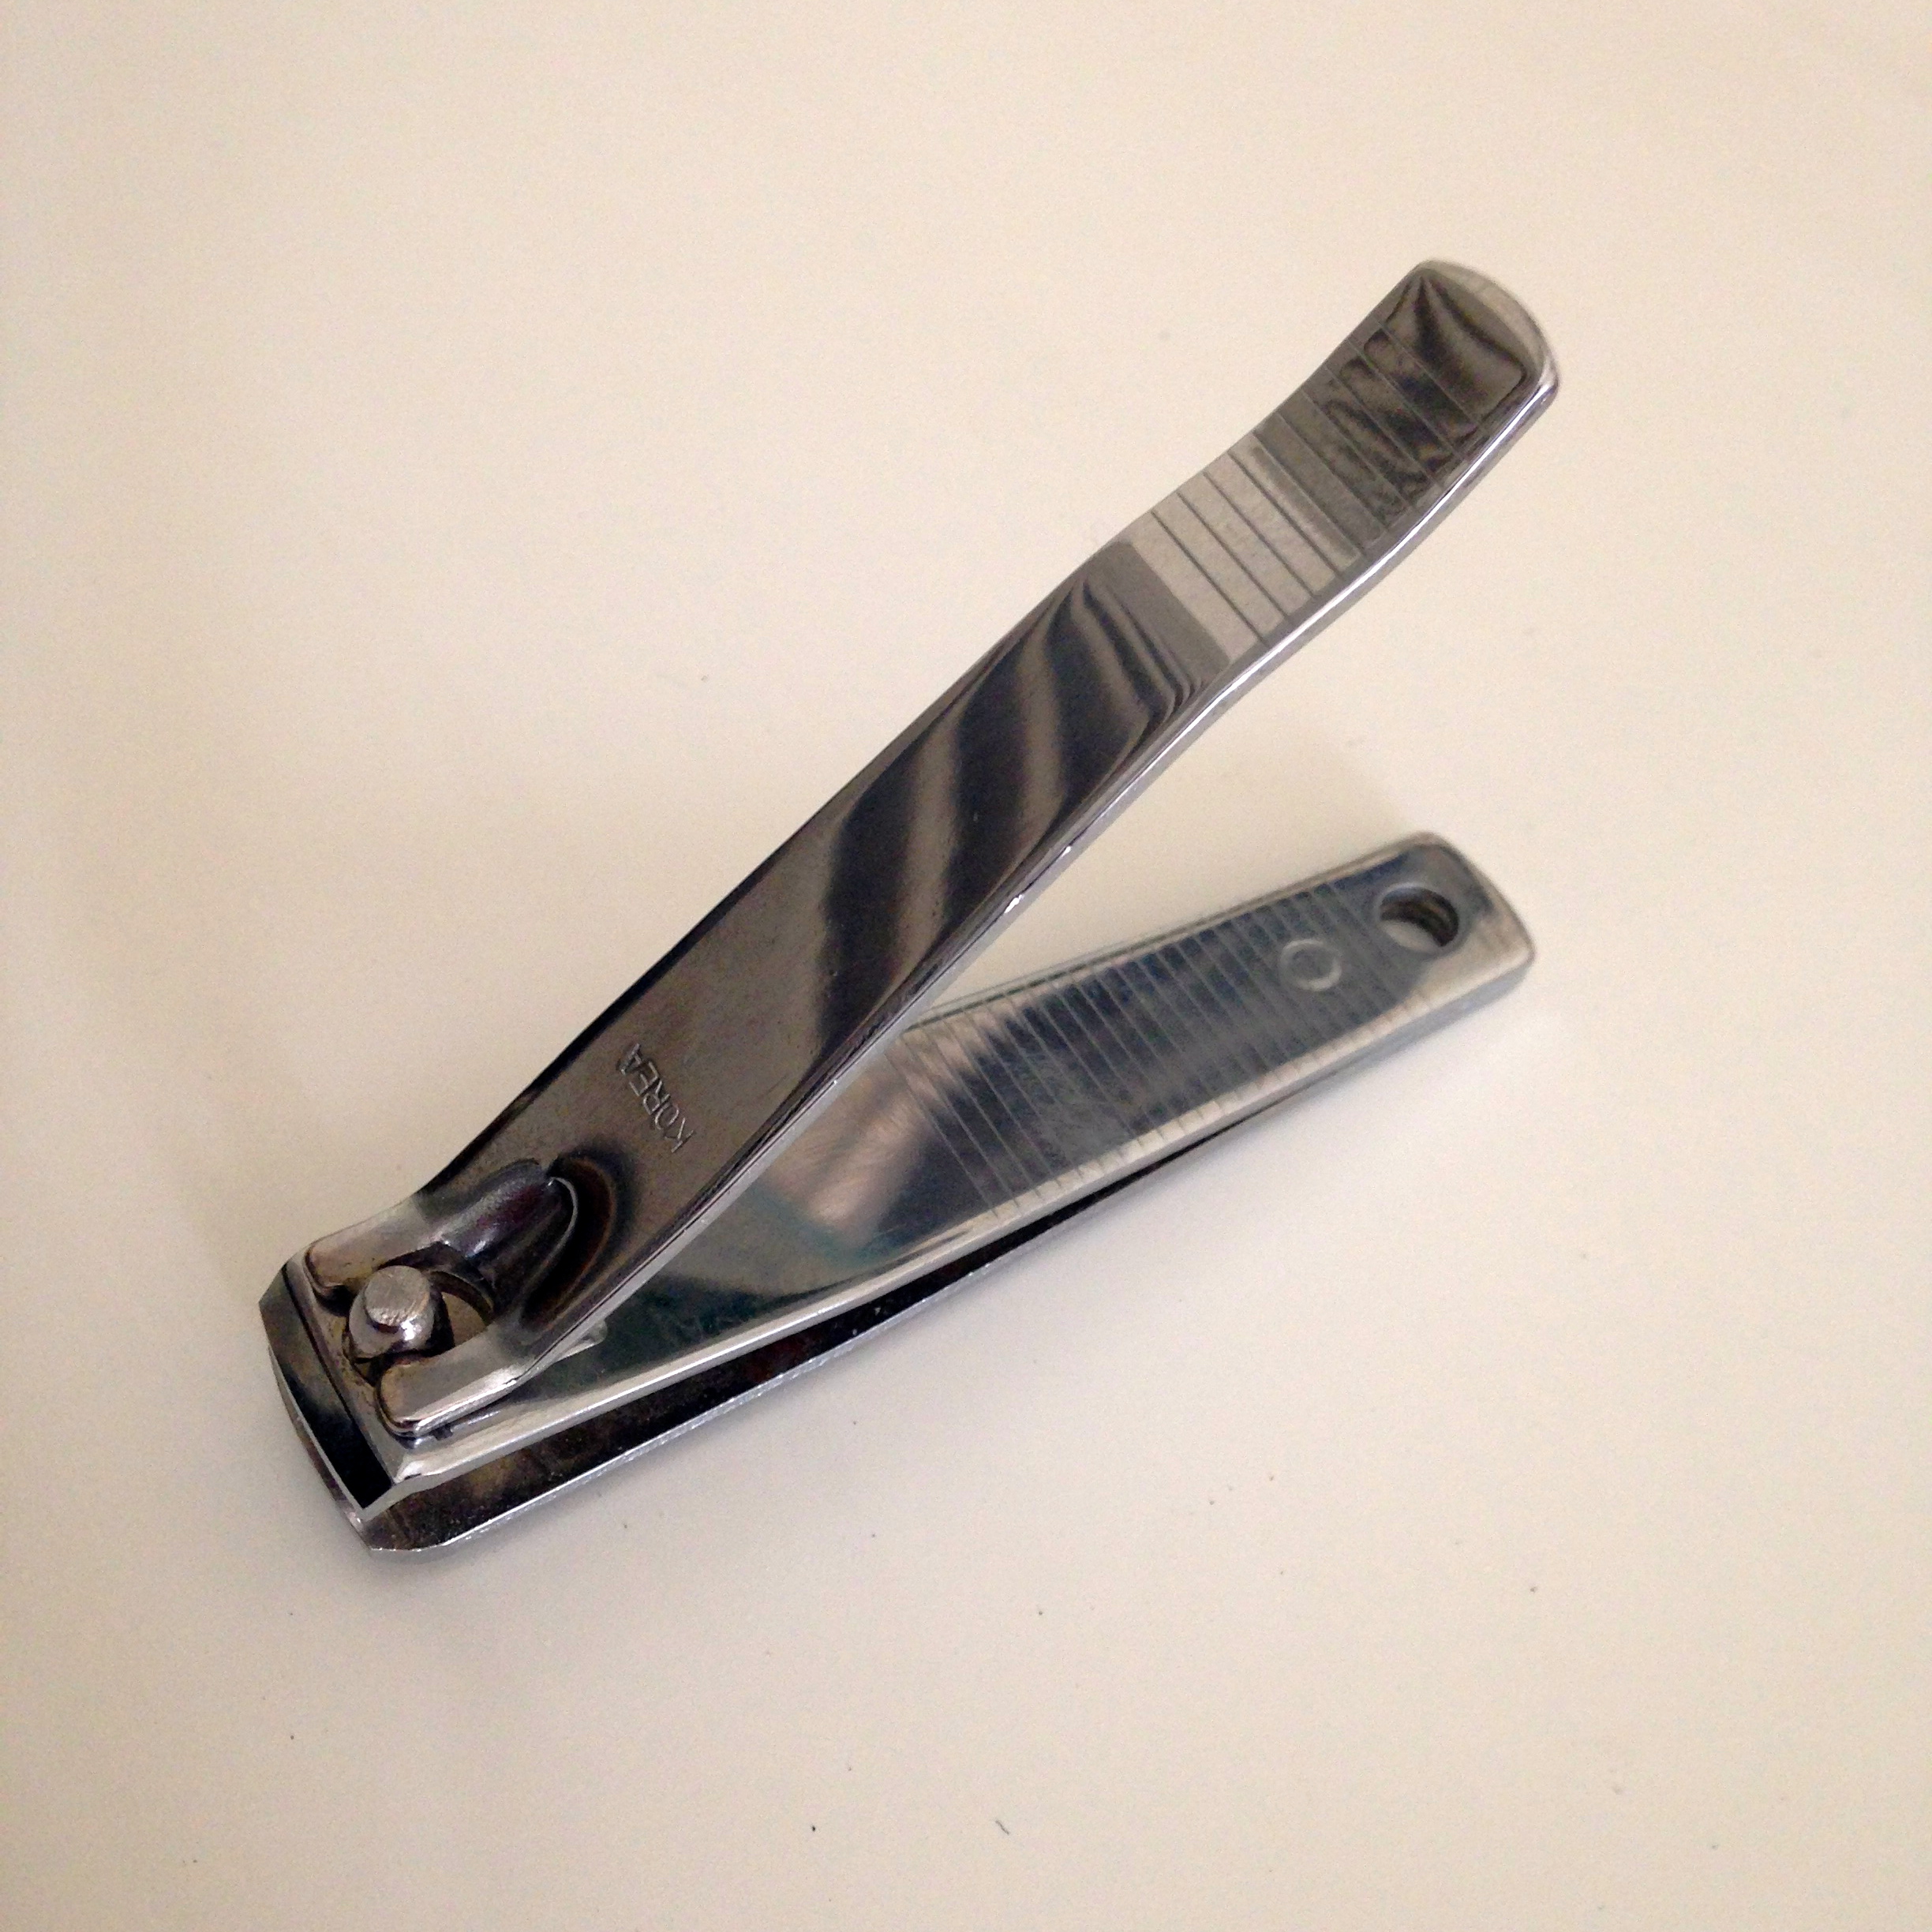 Toenail Clippers for Jewelry Making